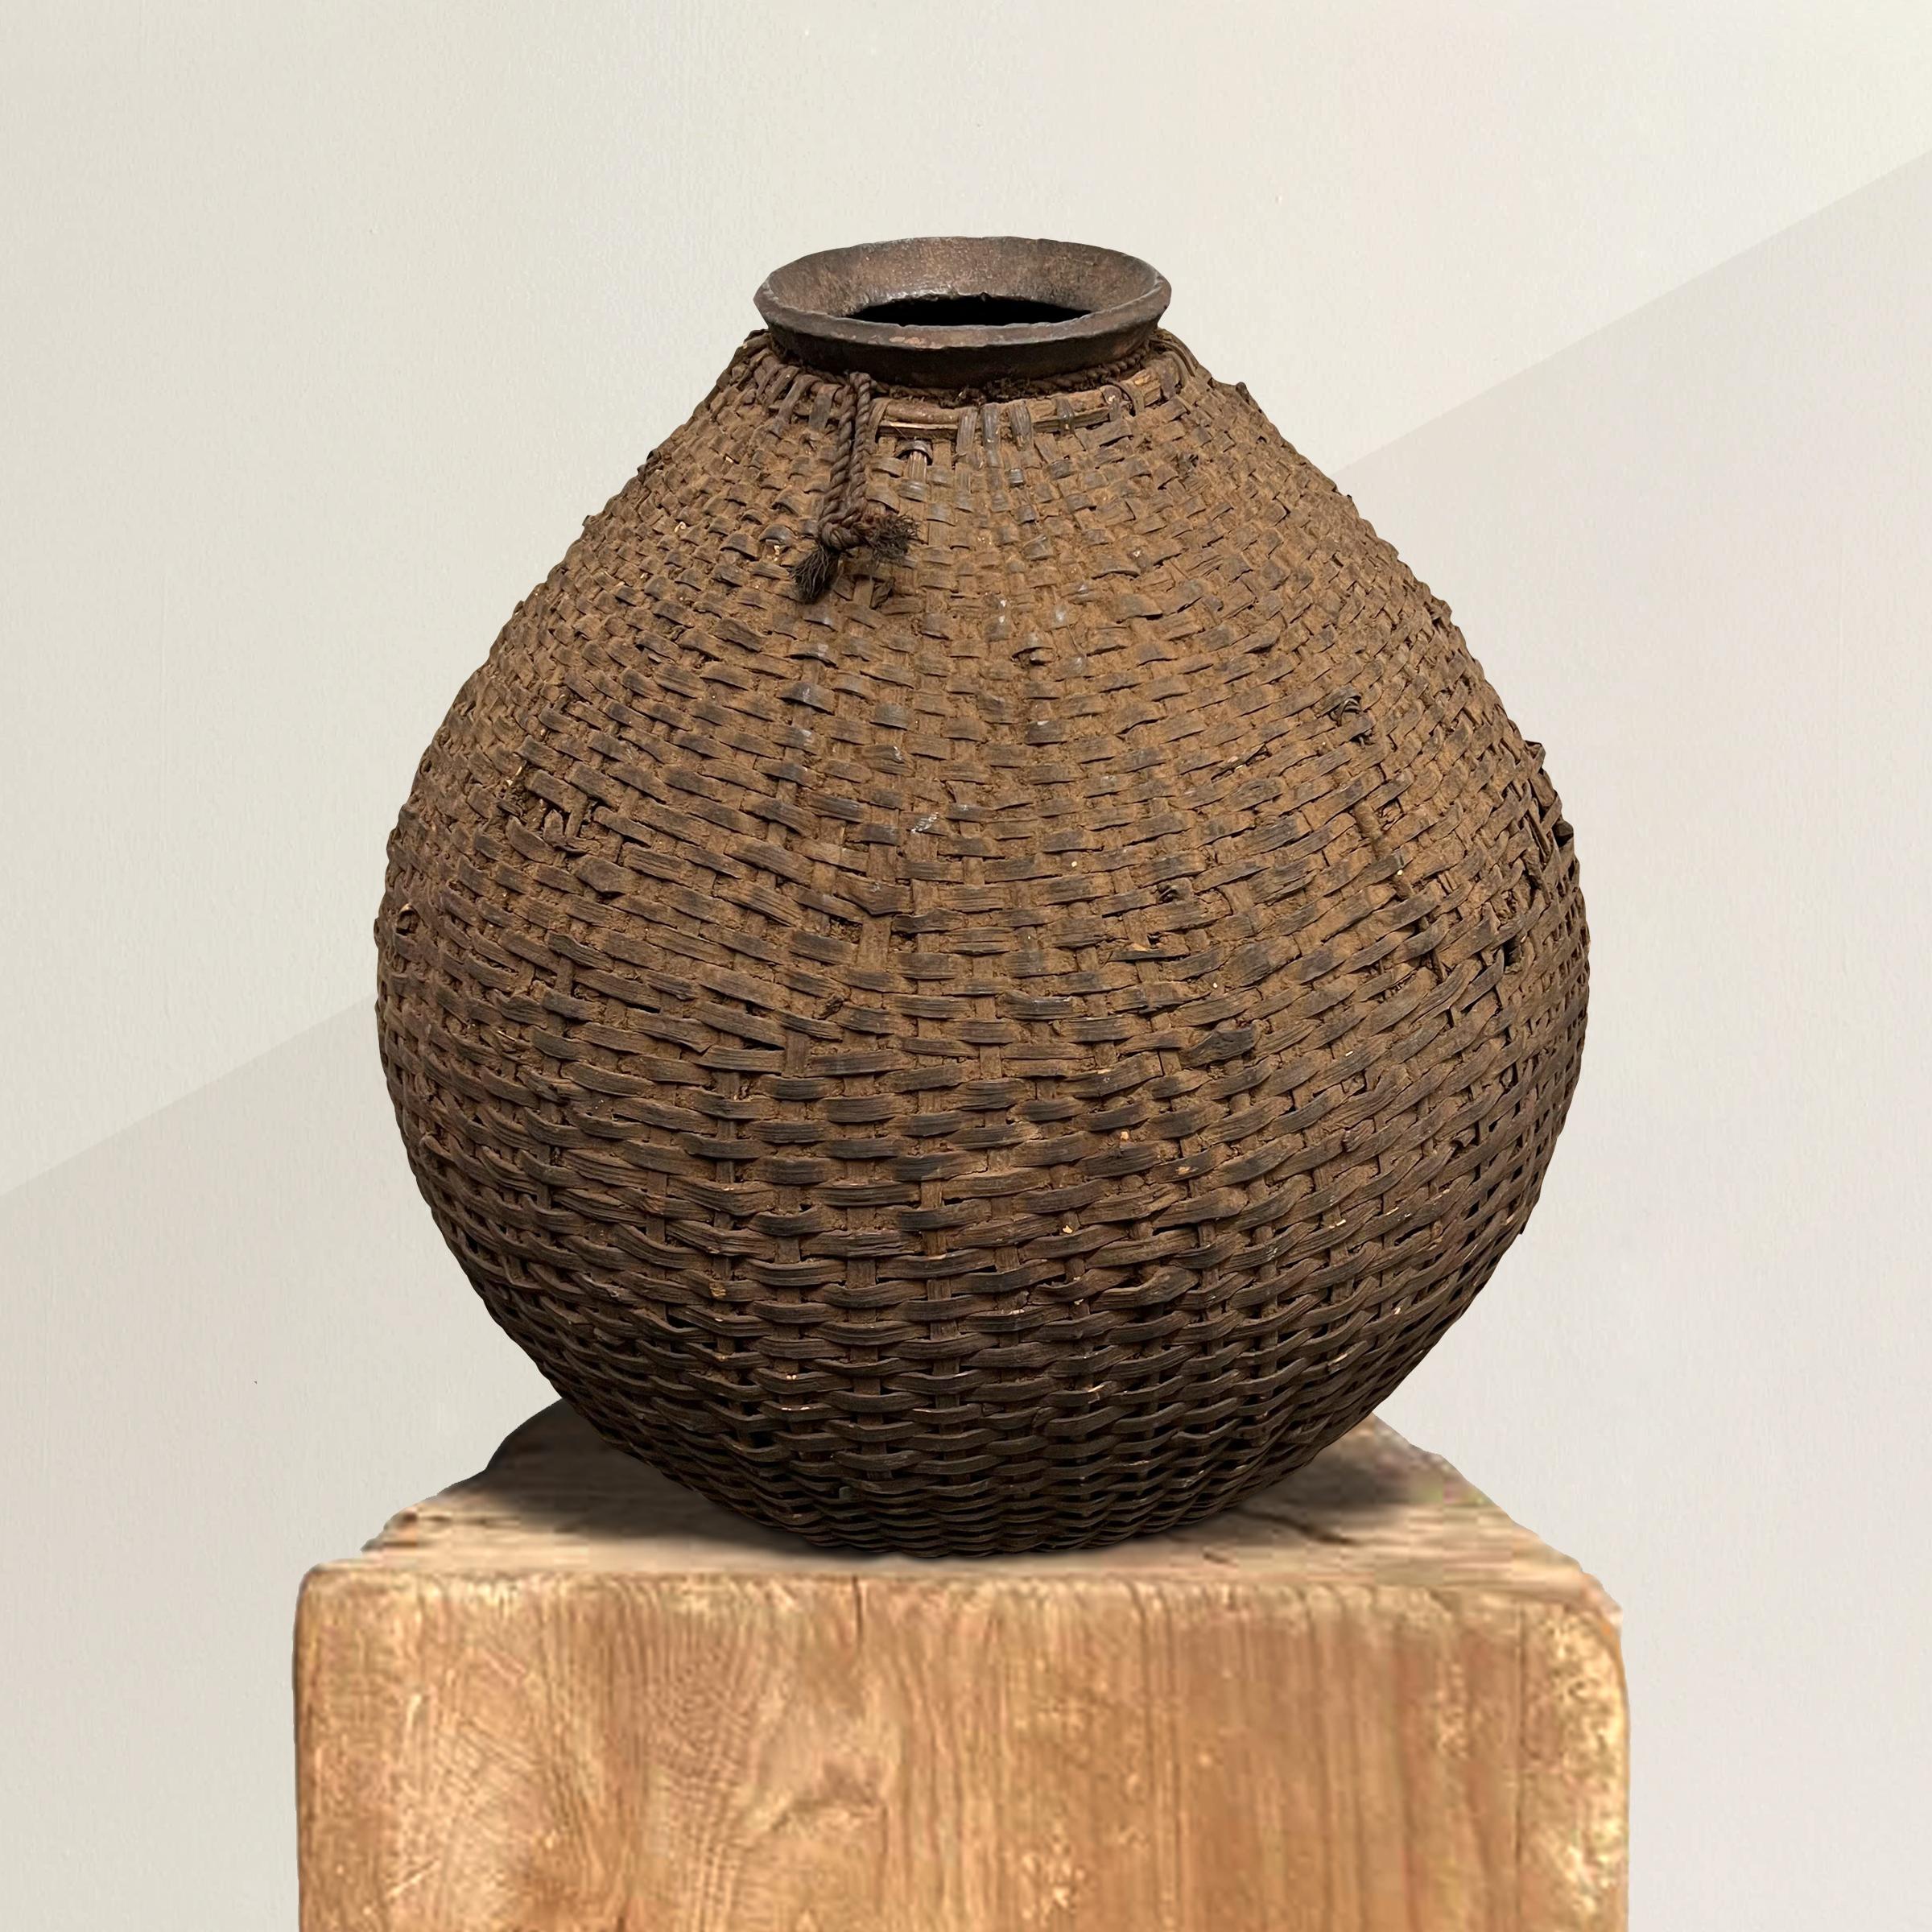 An incredible early 20th century Makenge hand-built ceramic palm wine pot with a graceful shape including a narrow neck and a wide belly. The pot is covered in a hand-woven wicker basket covering, skillfully woven to form perfectly to the shape of